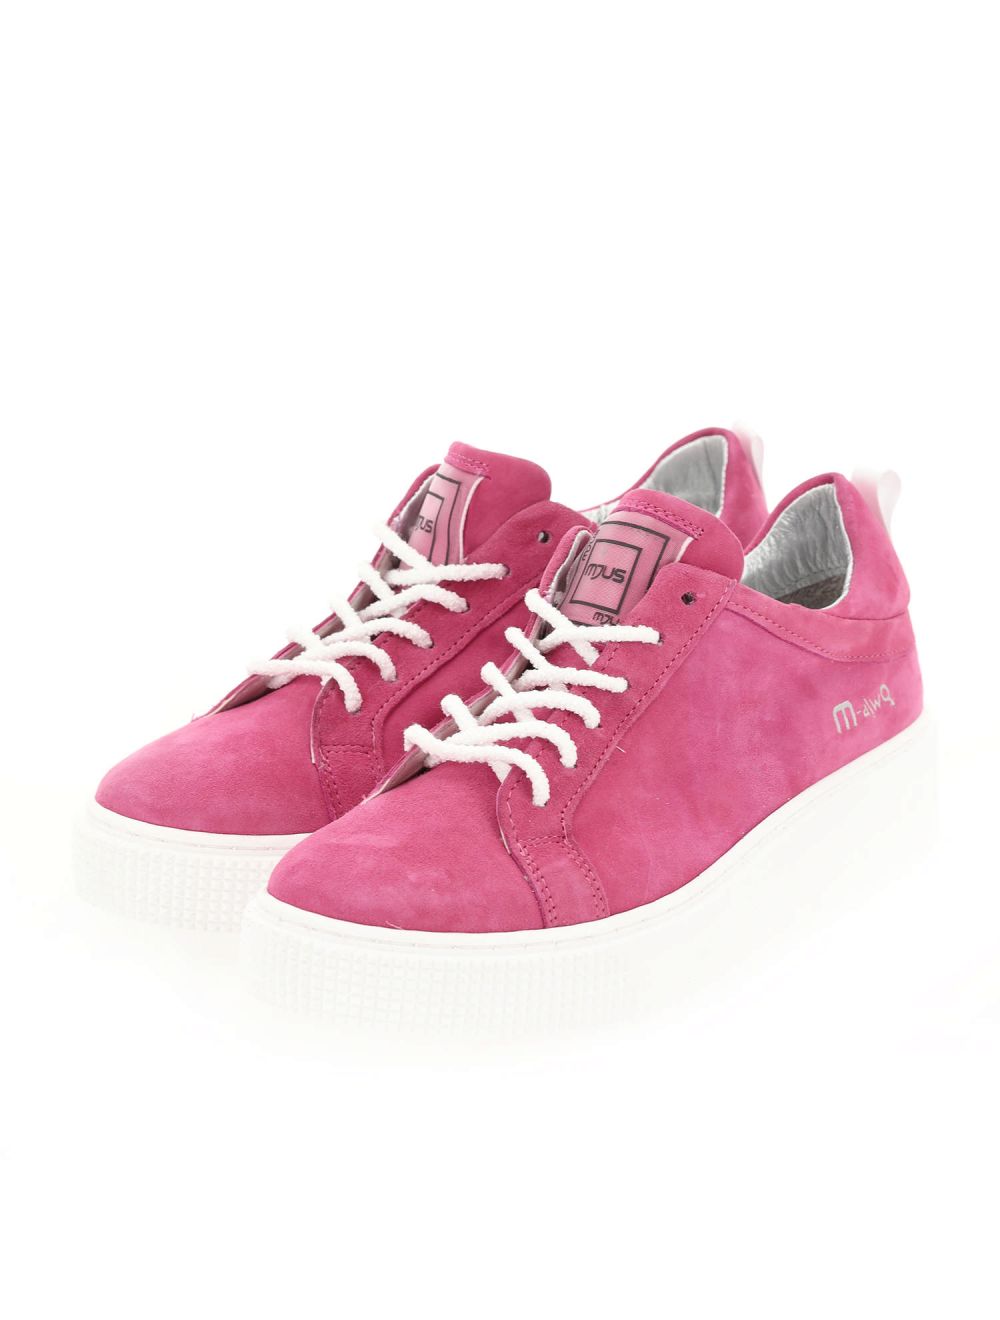 MJUS TODAY M08135 SNEAKERS CHIC